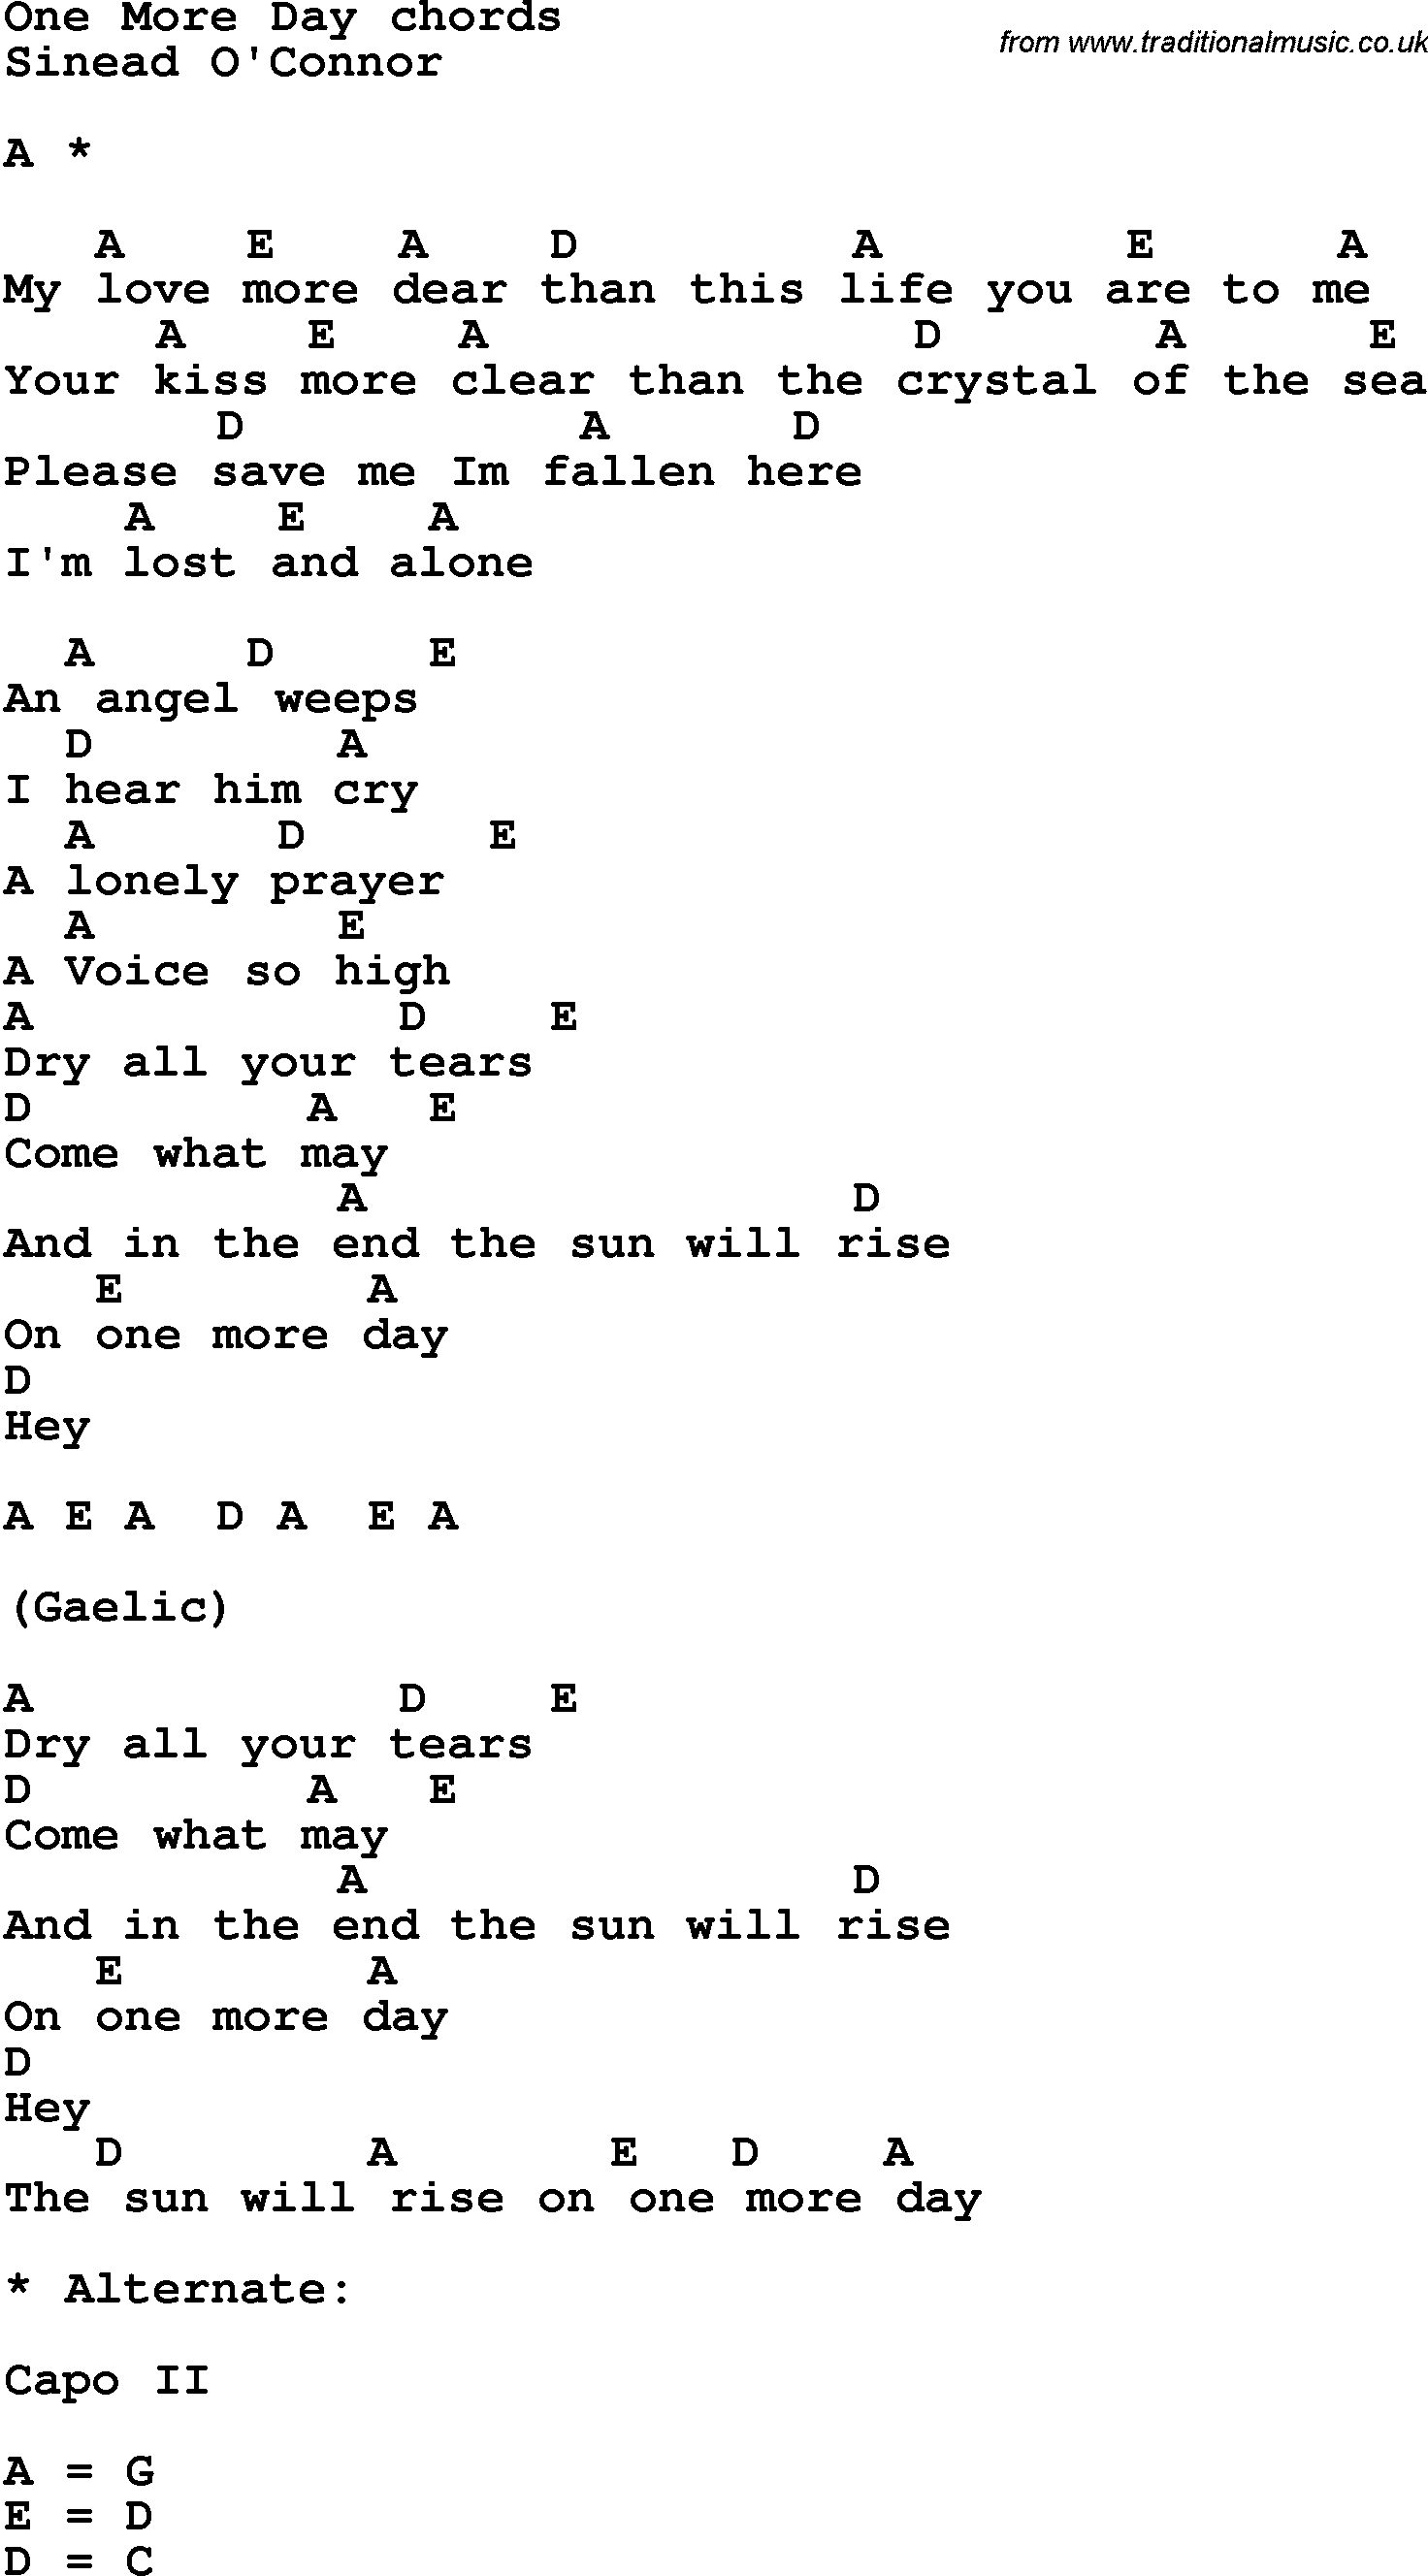 Song Lyrics with guitar chords for One More Day